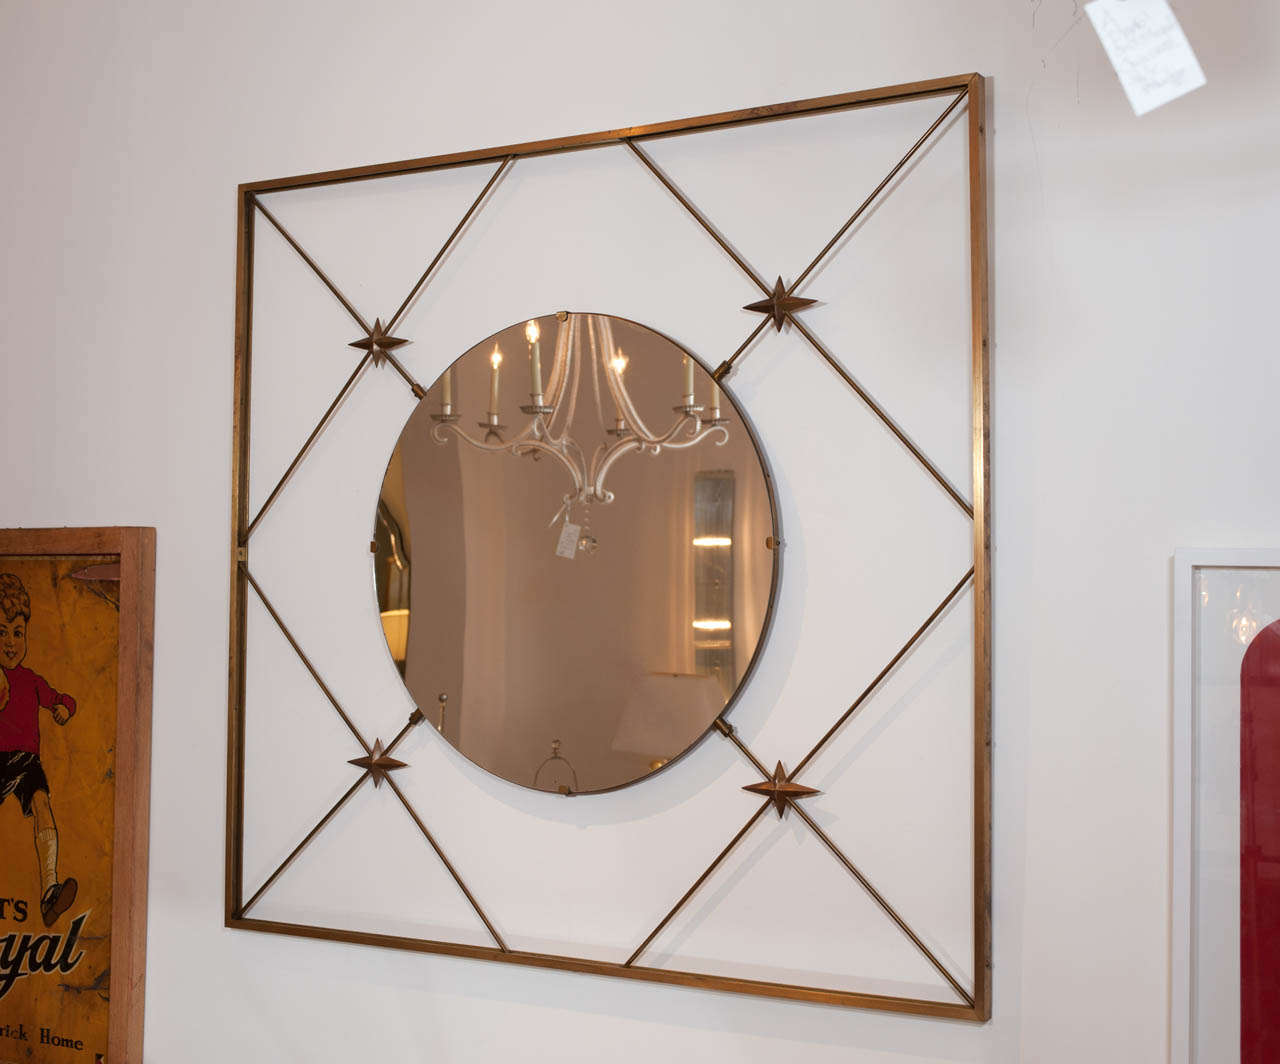 This unique and rare mirror strikes an impressive pose over a mantle or that
special room that says 